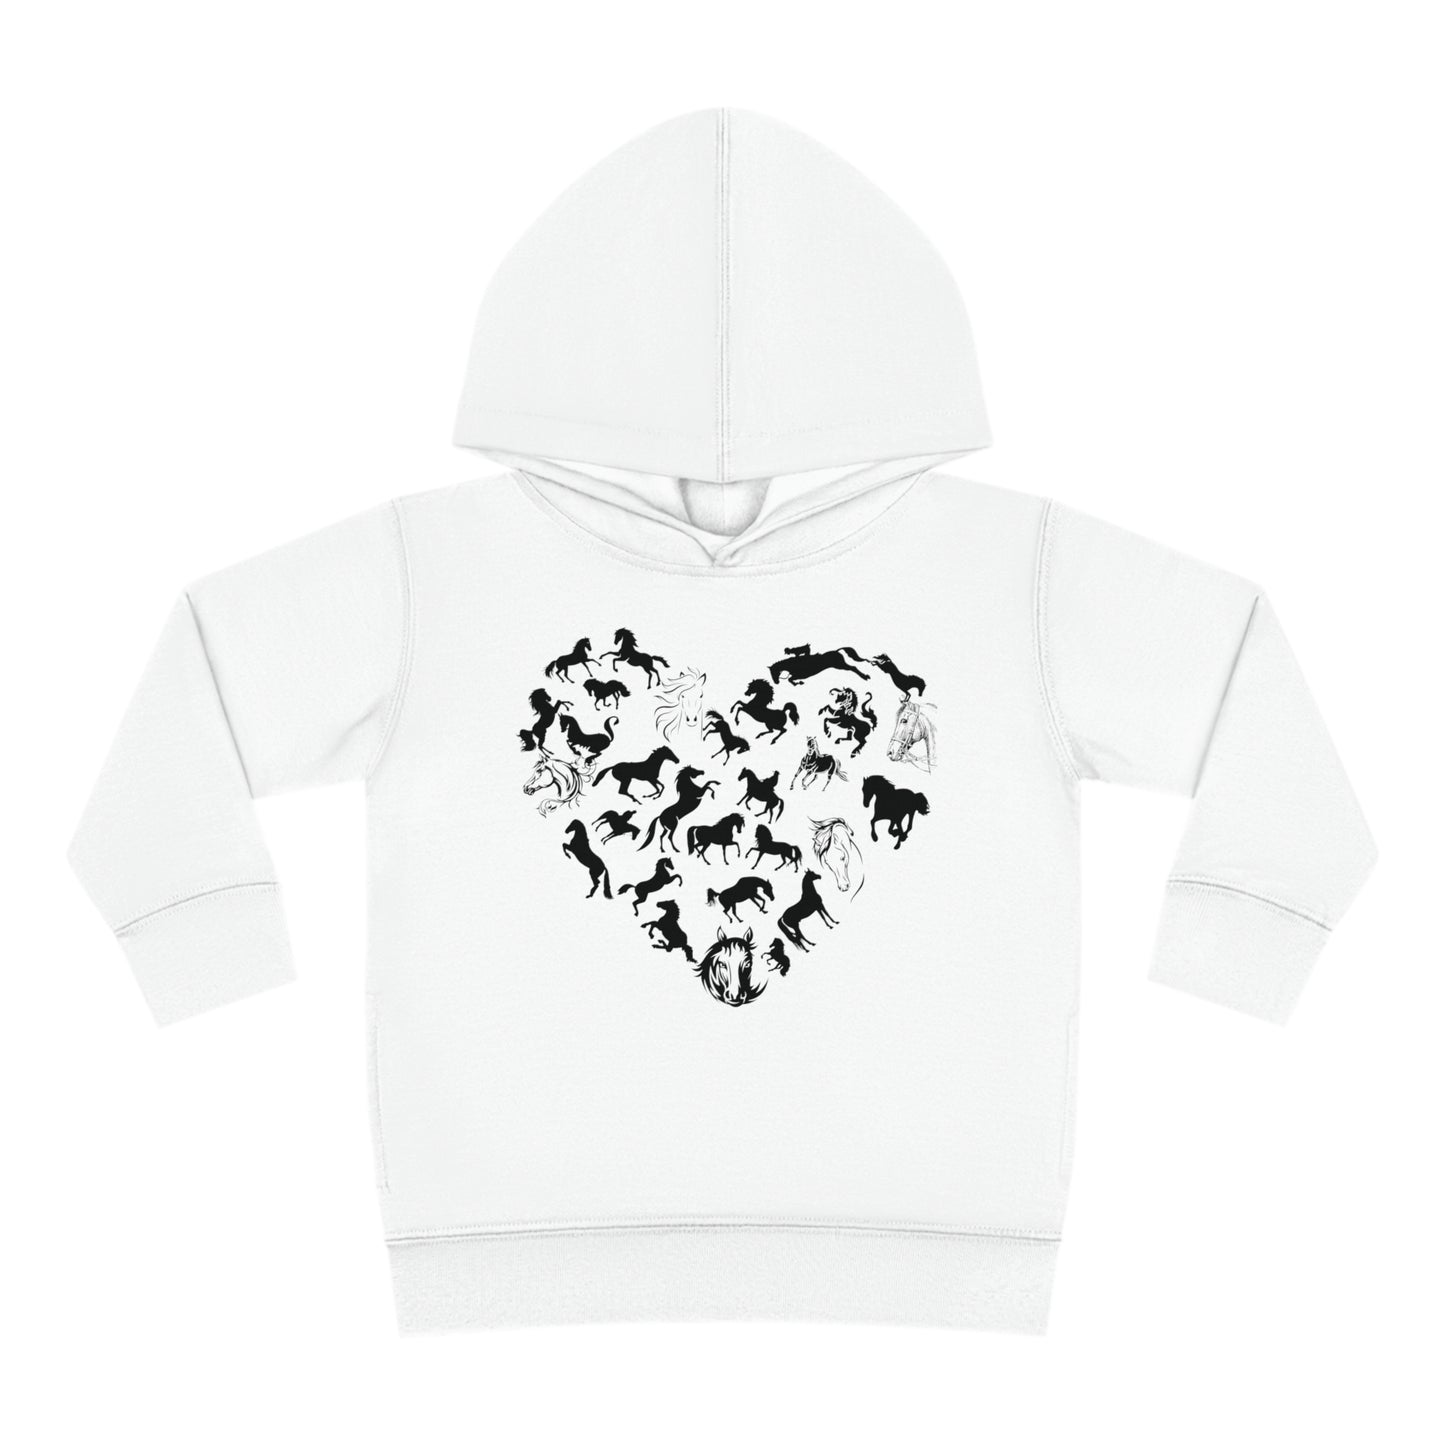 Horse Heart Hoodie | Horse Lover Tee - Horses Heart Toddler - Horse Lover Gift - Horse Toddler Shirt - Equestrian Tee - Gift for Horse Owner Kids clothes White 2T 